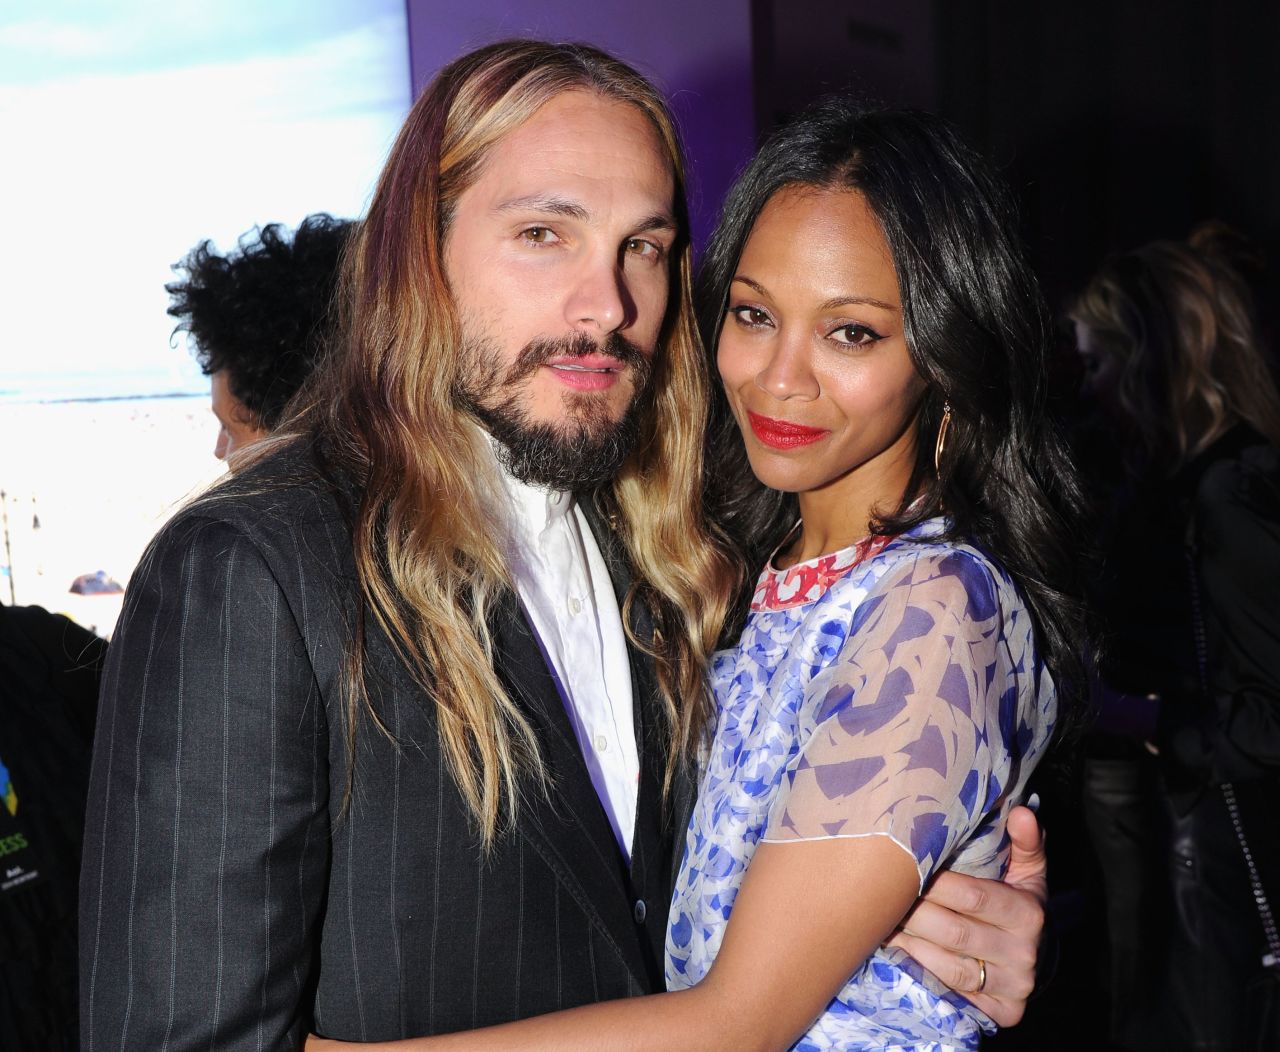 Zoe Saldana appears to be the type who'd rather show than tell. The actress and her artist husband, Marco Perego, were spotted wearing gold wedding bands in September 2013, which led to confirmation that the couple had actually married earlier that summer in front of a small gathering of family and friends. And with the couple now expecting their first child, Saldana stayed quiet until she confirmed her pregnancy by getting her husband<a href="https://www.youtube.com/embed/2cfGEUd5BTU" target="_blank" target="_blank"> to take the ALS bucket challenge for her. </a>